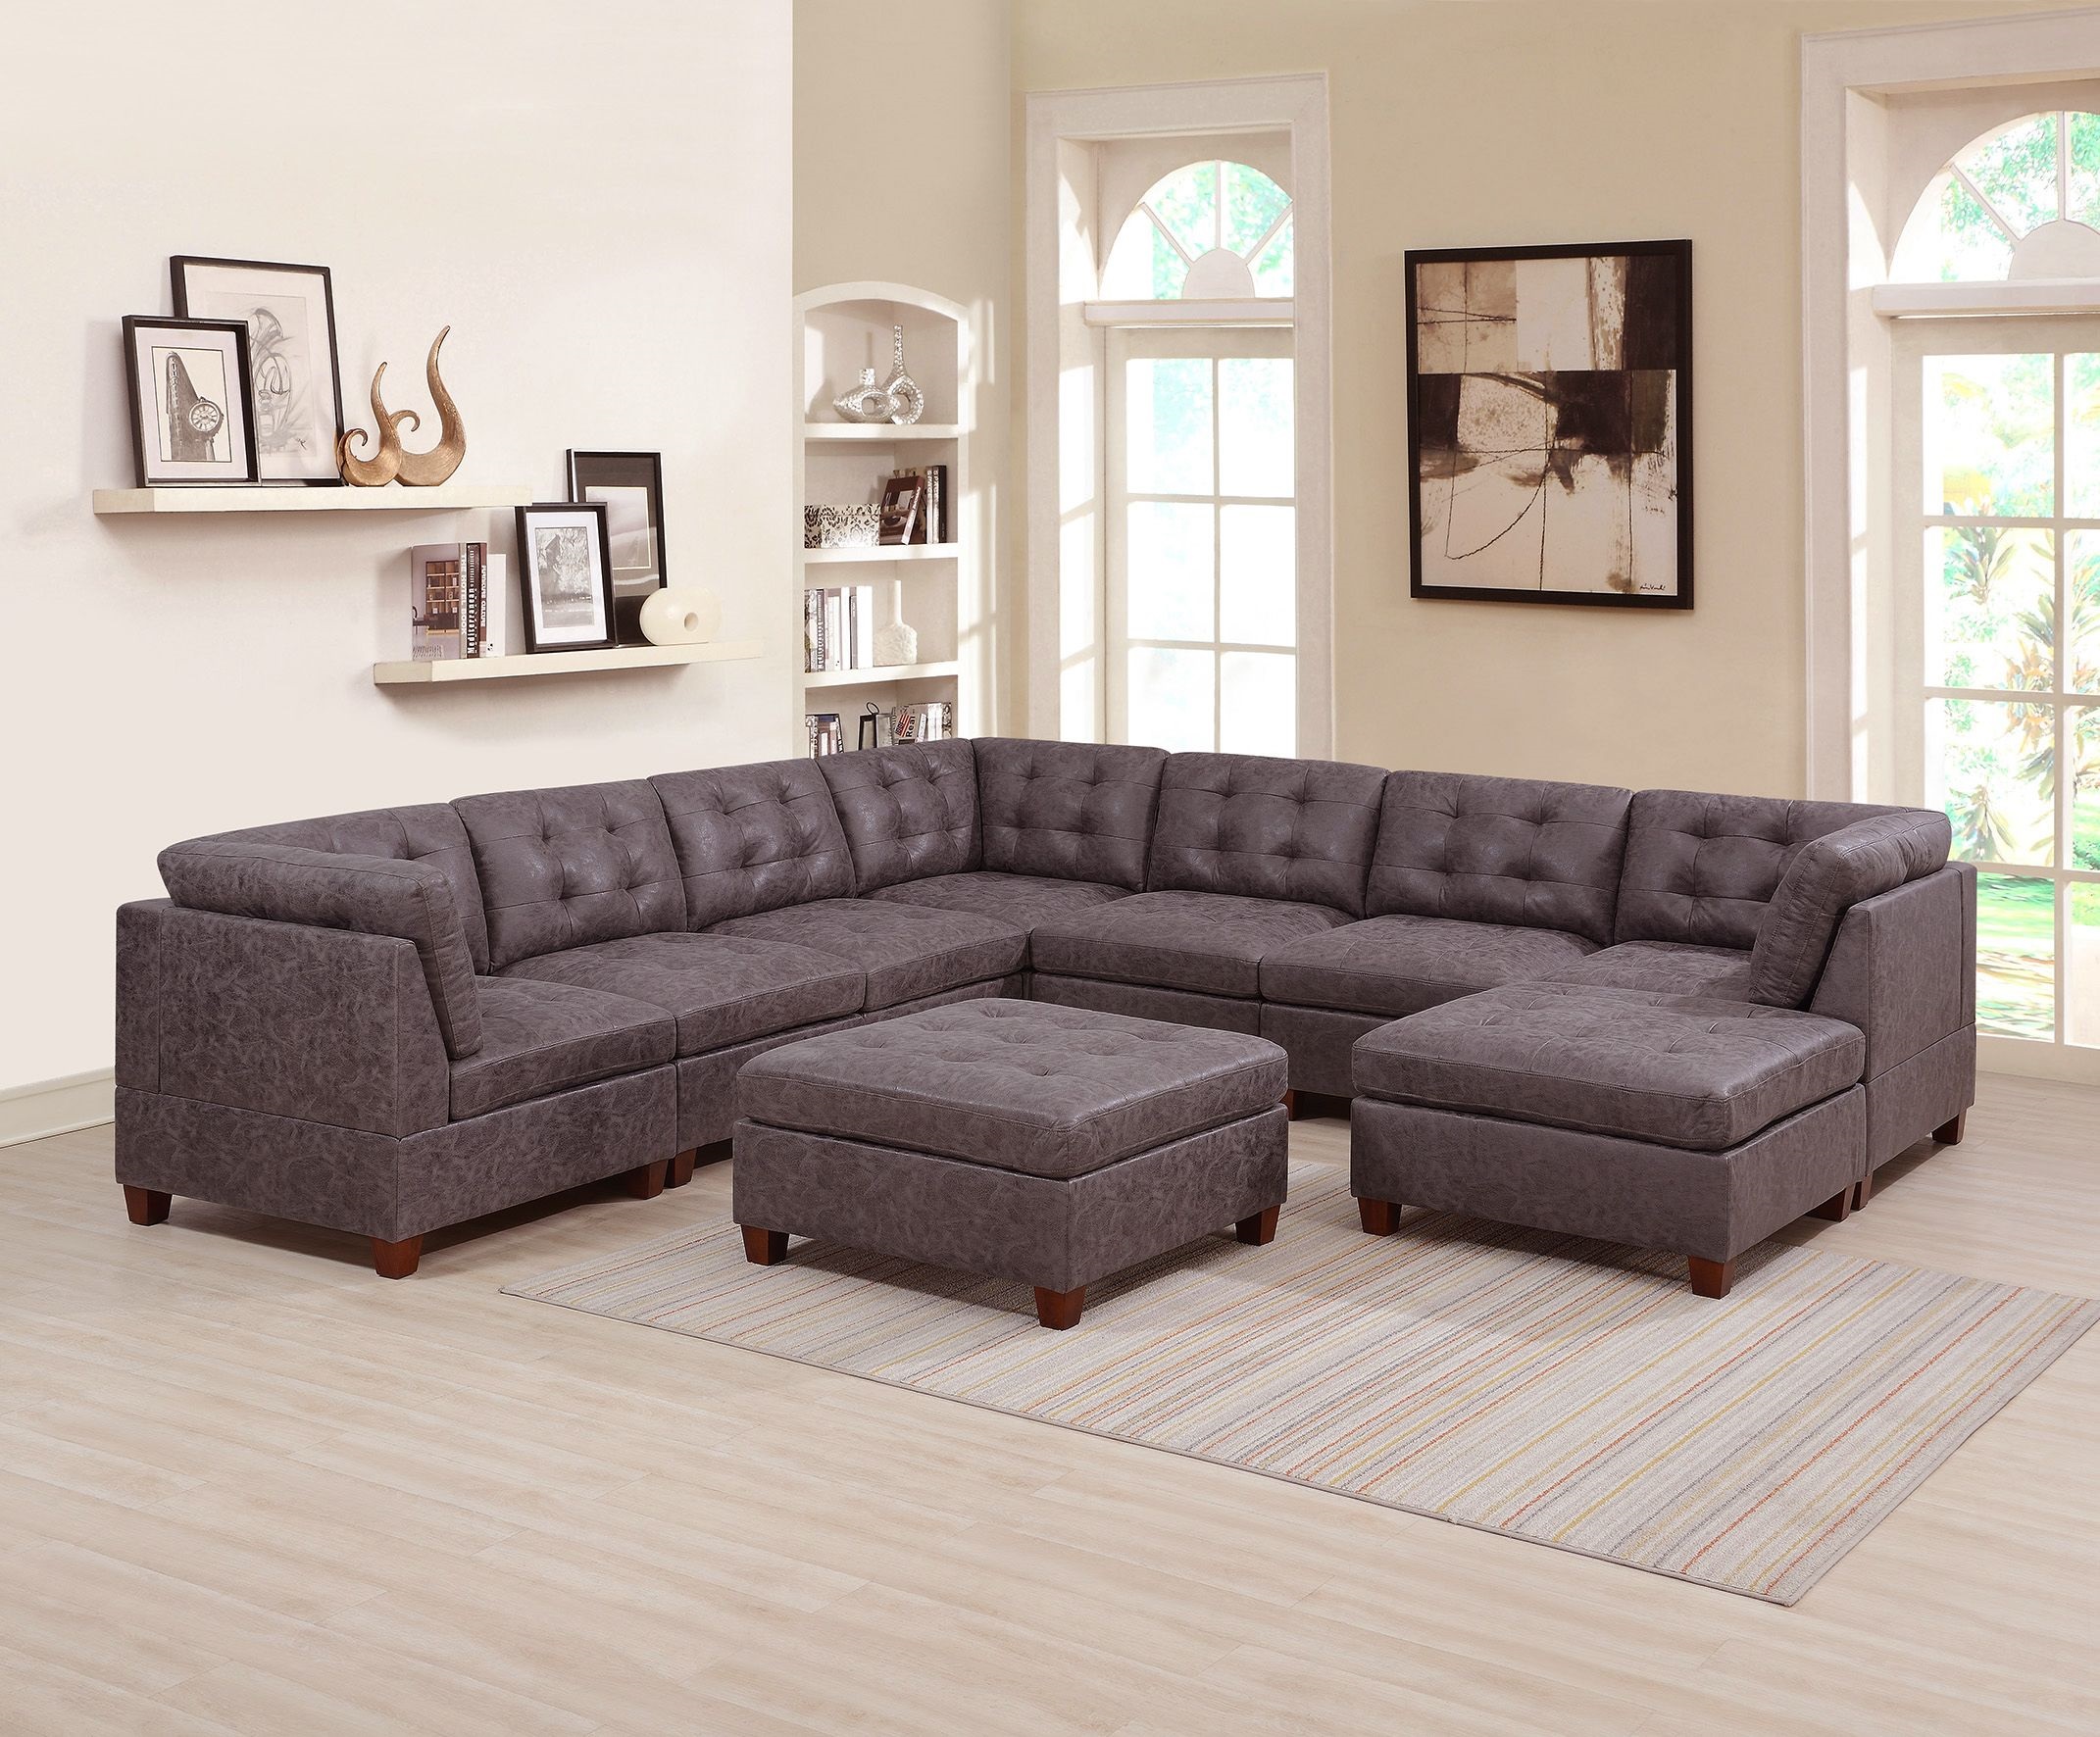 Esofa Unique Modern Leatherette, Brown Sectional Living Room